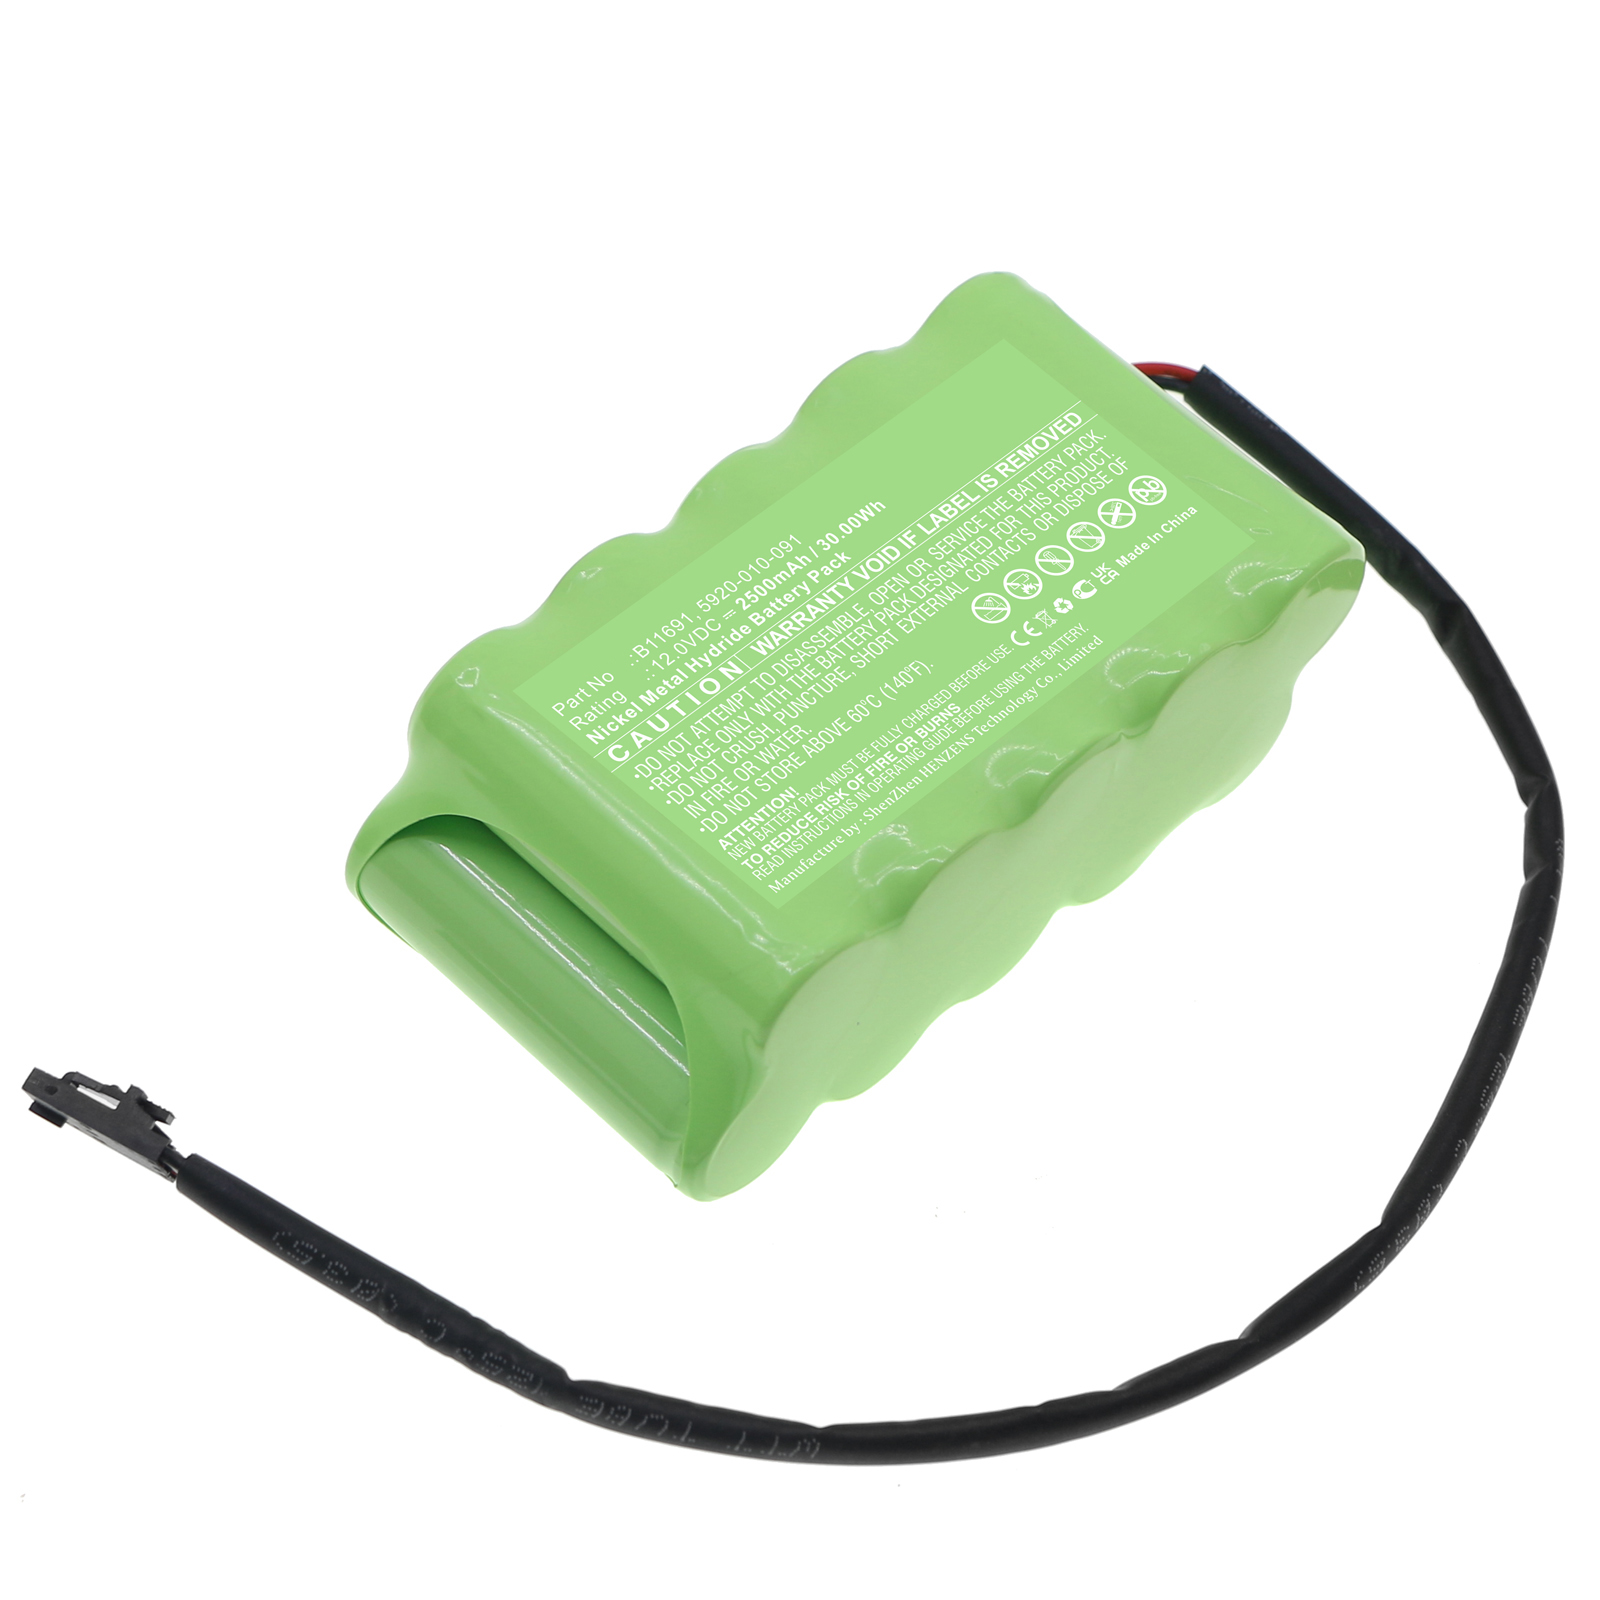 Synergy Digital Medical Battery, Compatible with Stryker 5920-010-091 Medical Battery (Ni-MH, 12V, 2500mAh)